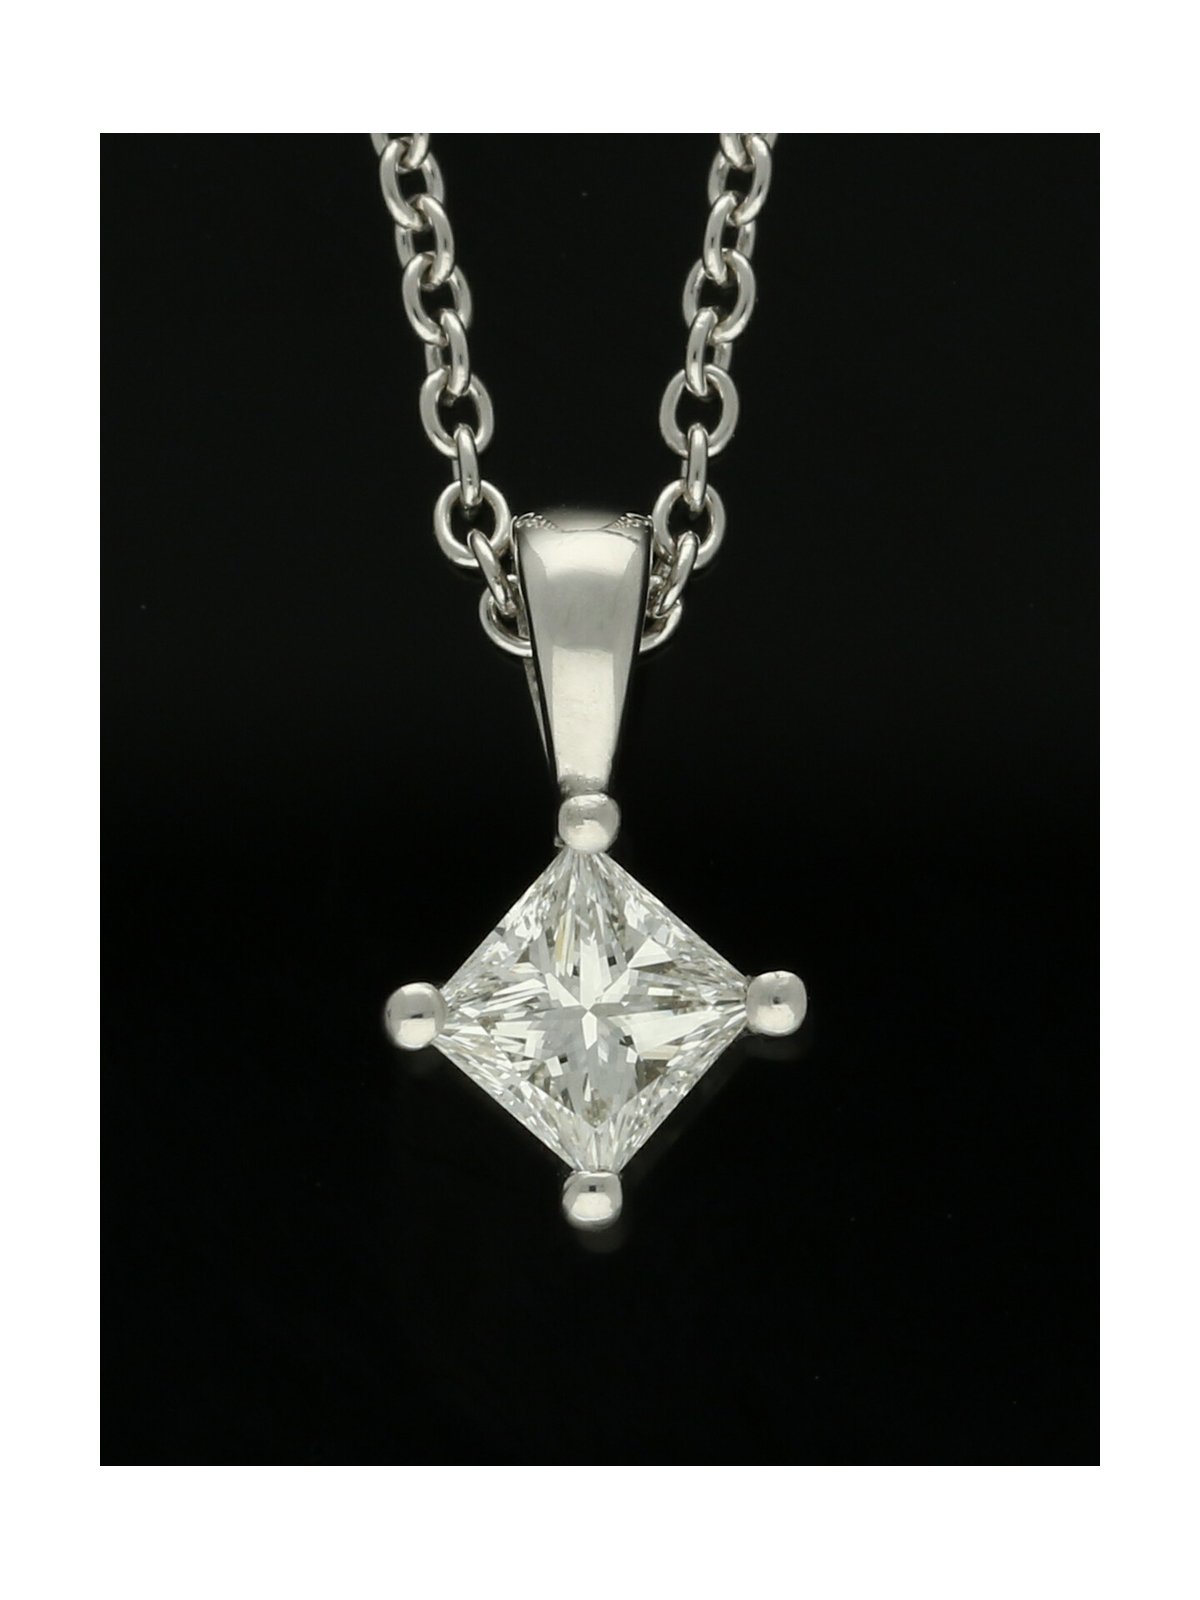 Diamond Solitaire Pendant "The Grace Collection" 0.30ct Princess Cut in 18ct White Gold